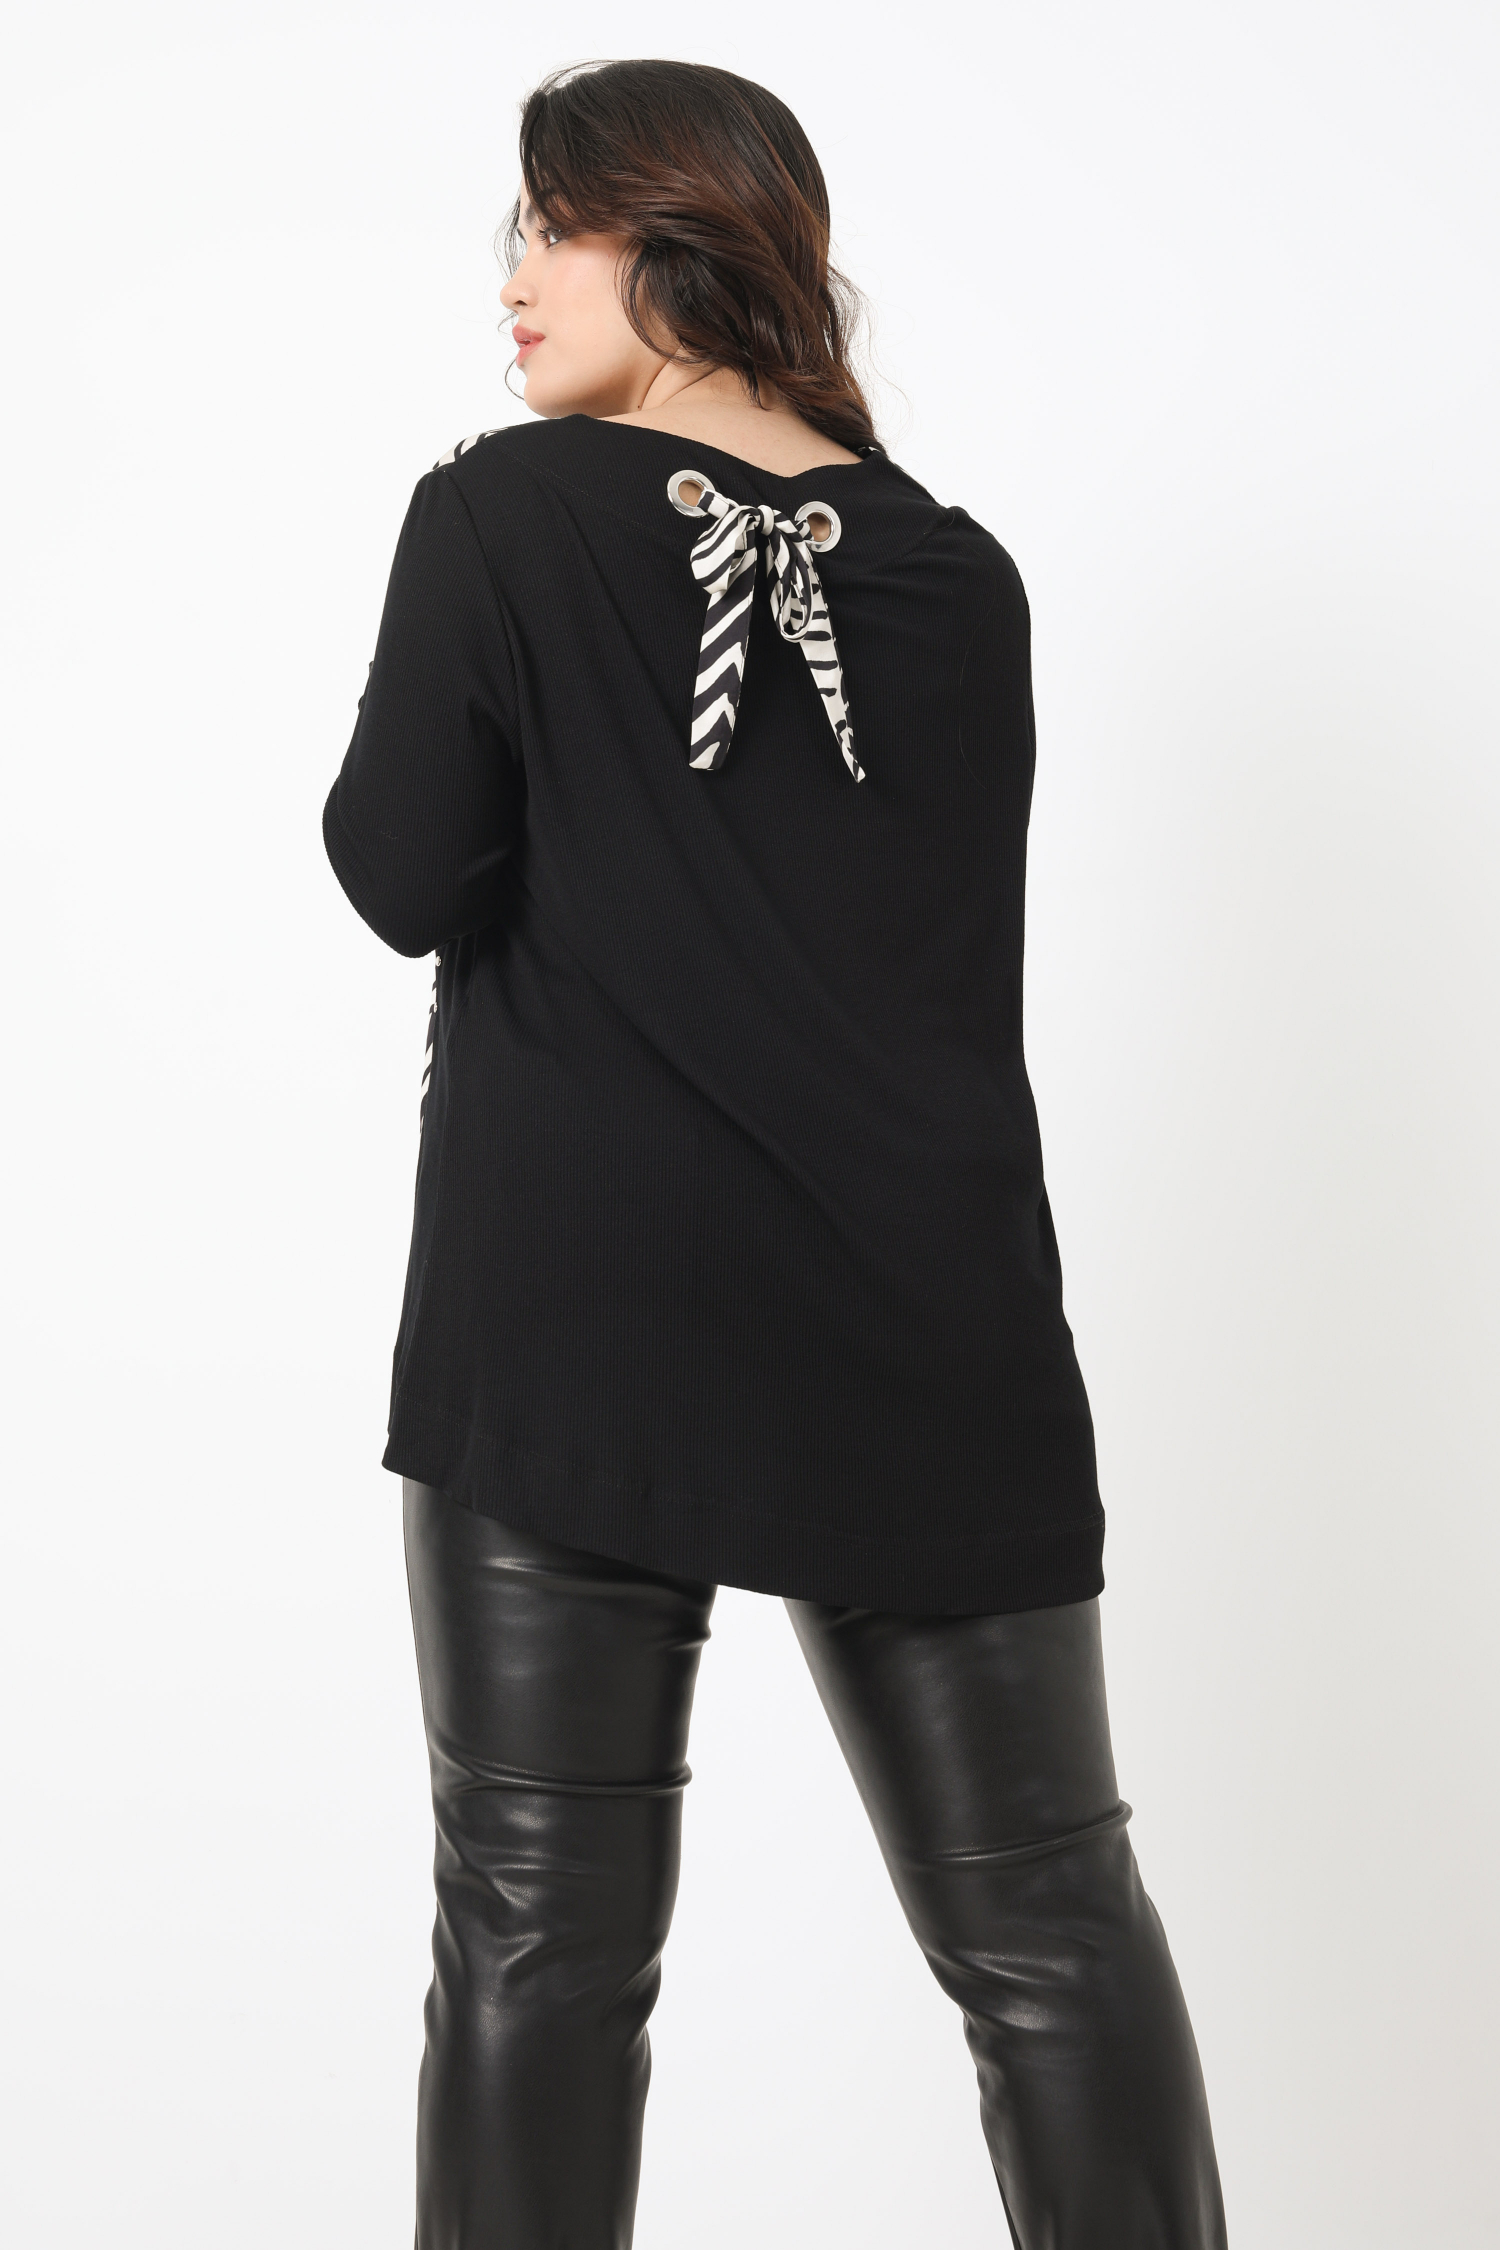 Bi-material t-shirt with large decorative eyelet